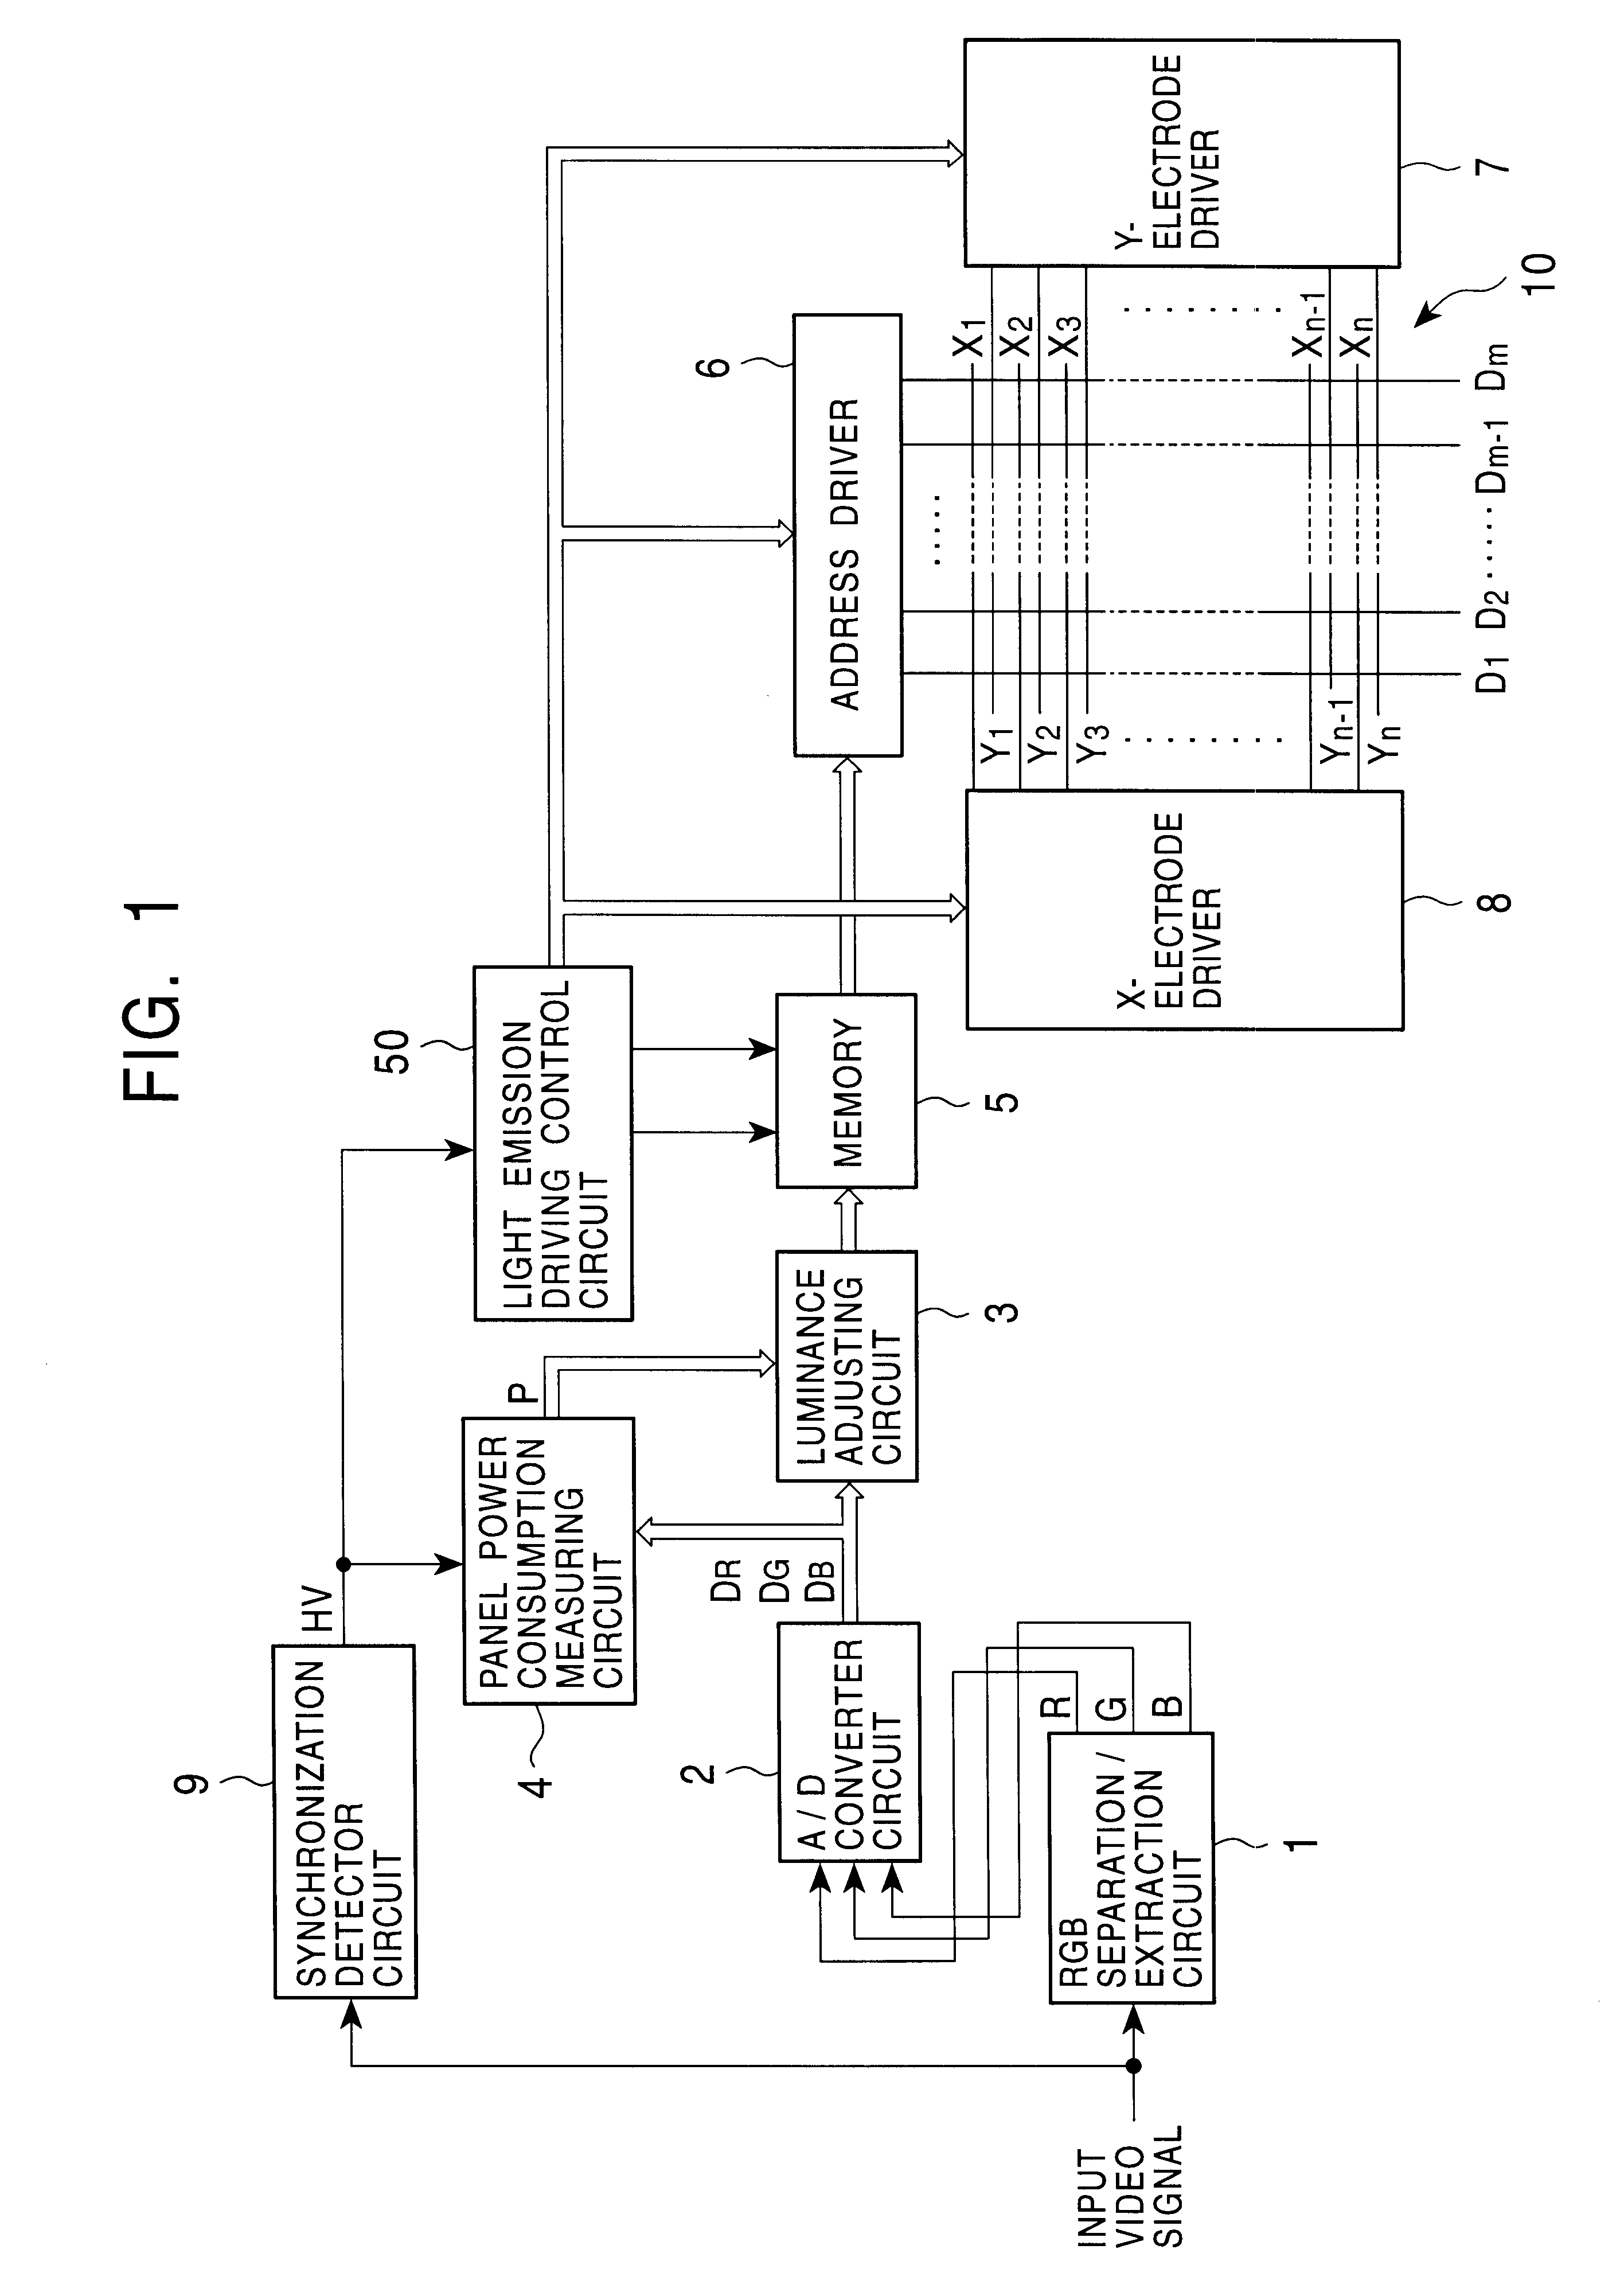 Driving apparatus for driving a plasma display panel based on power consumed during a non-light emitting period of a unit display period